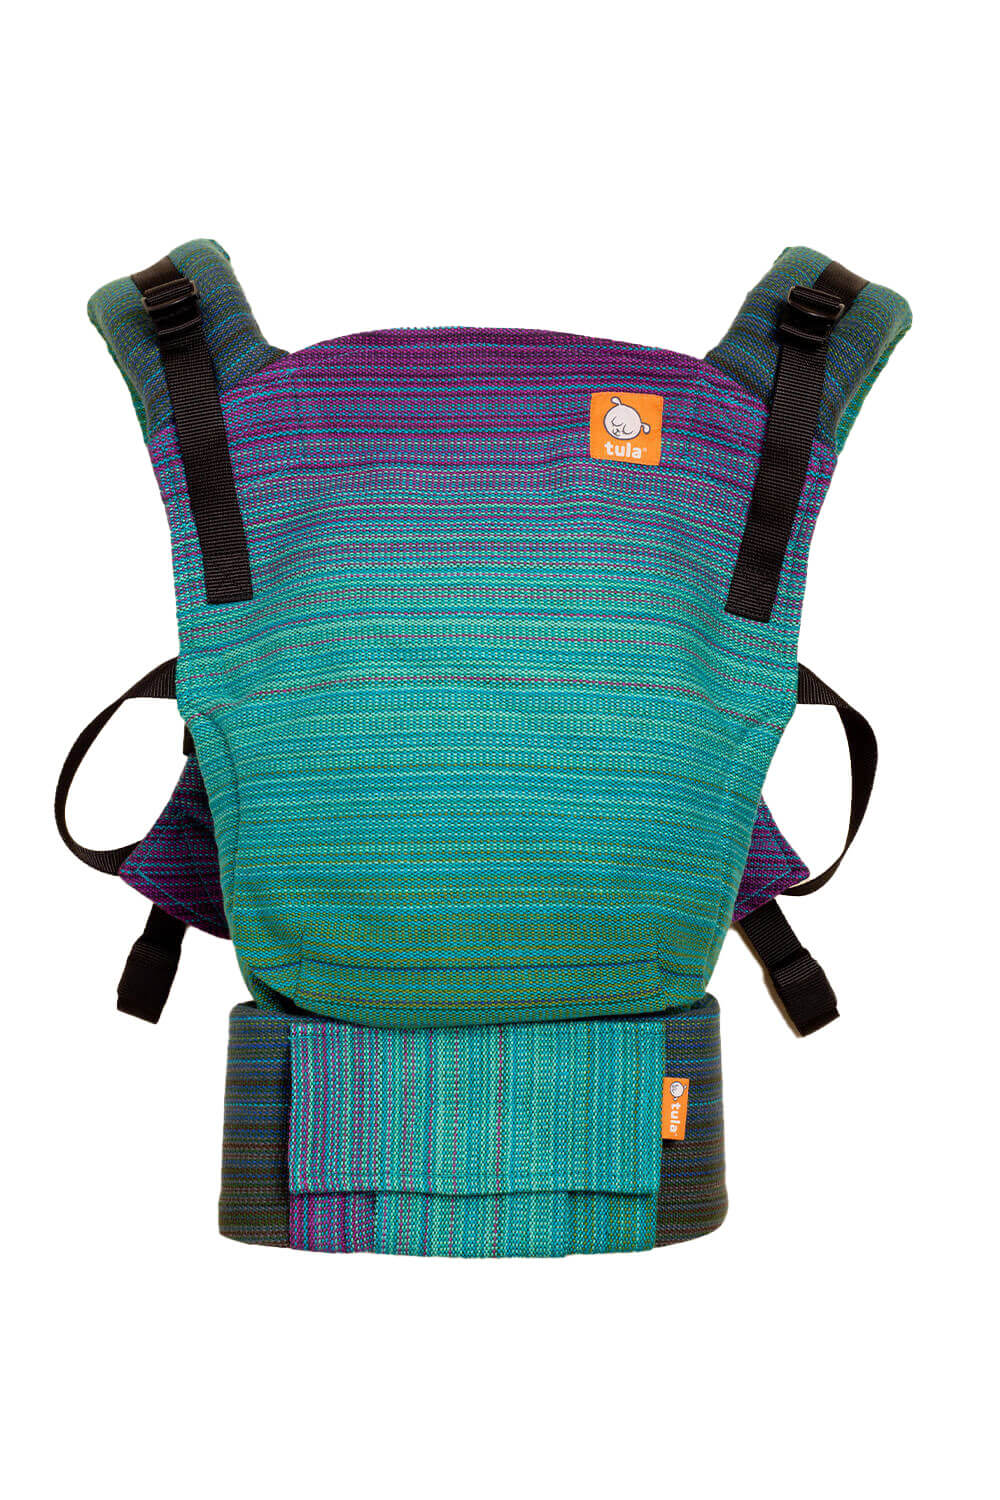 Extrasolar - Signature Handwoven Free-to-Grow Baby Carrier